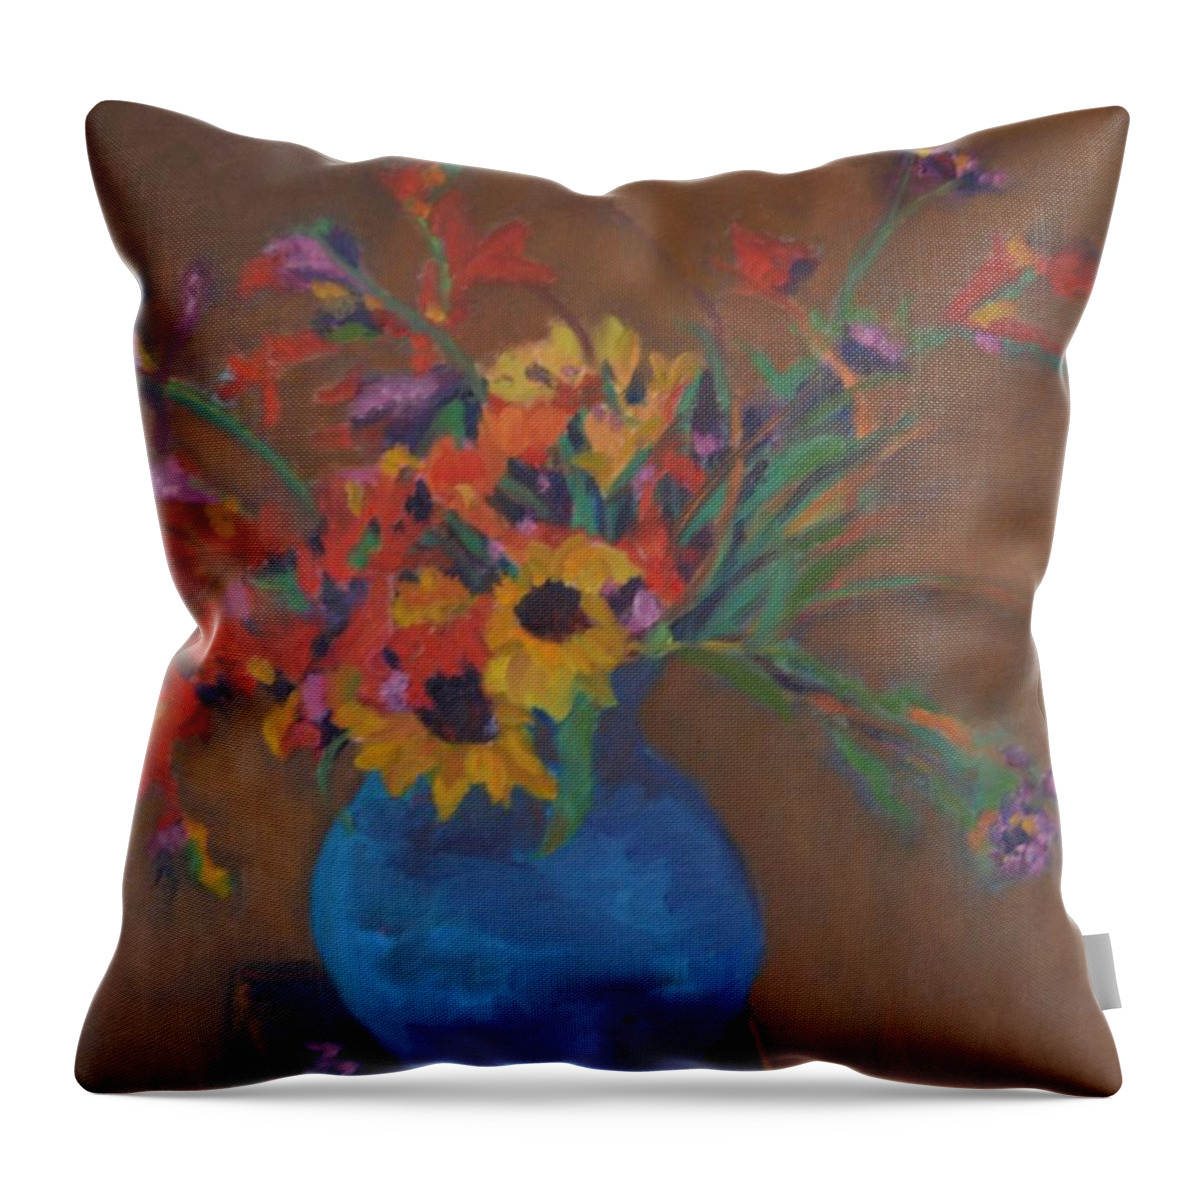 Still Life Throw Pillow featuring the painting Colors by Beth Riso